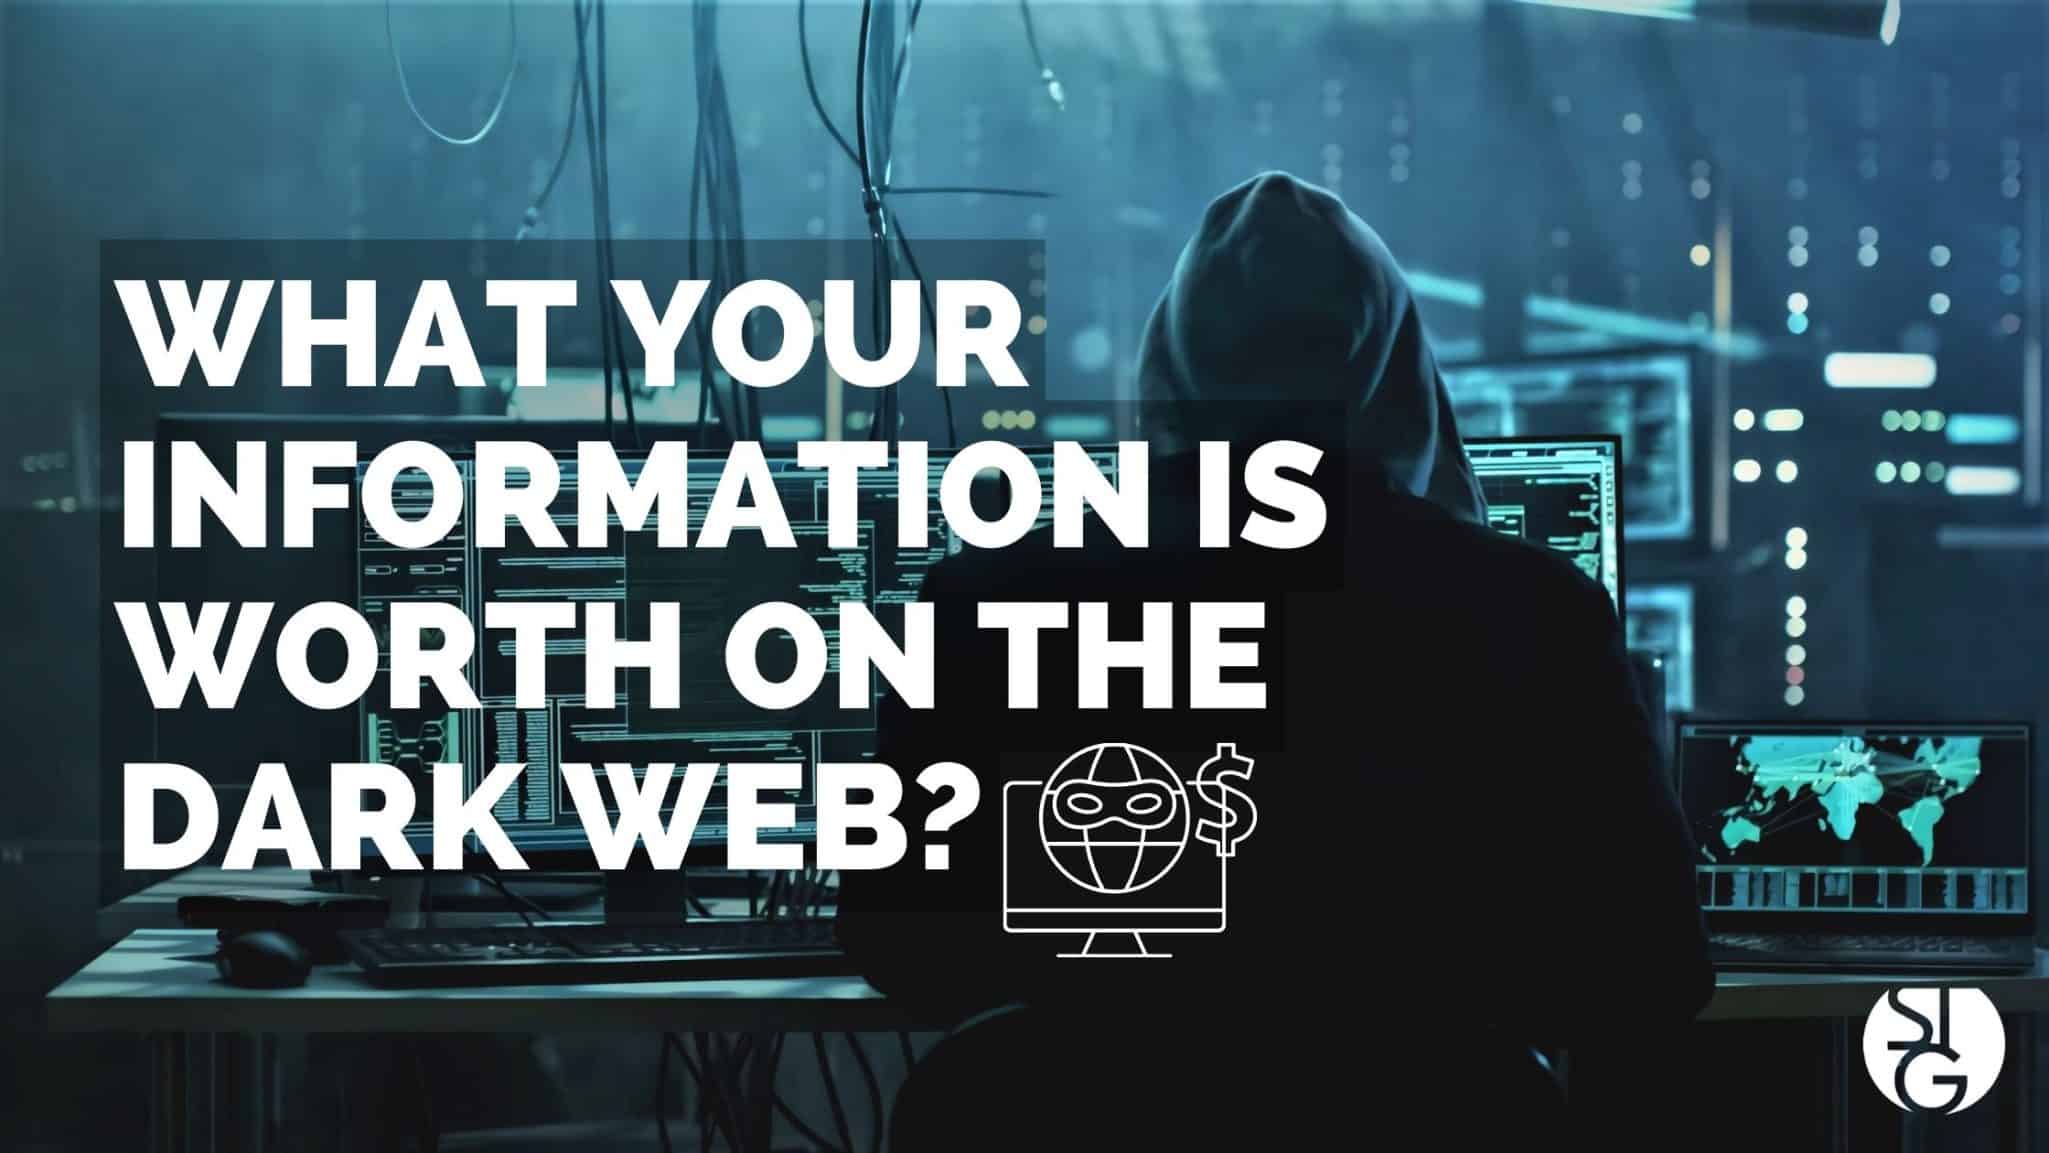 What is Your Information Worth on the Dark Web?